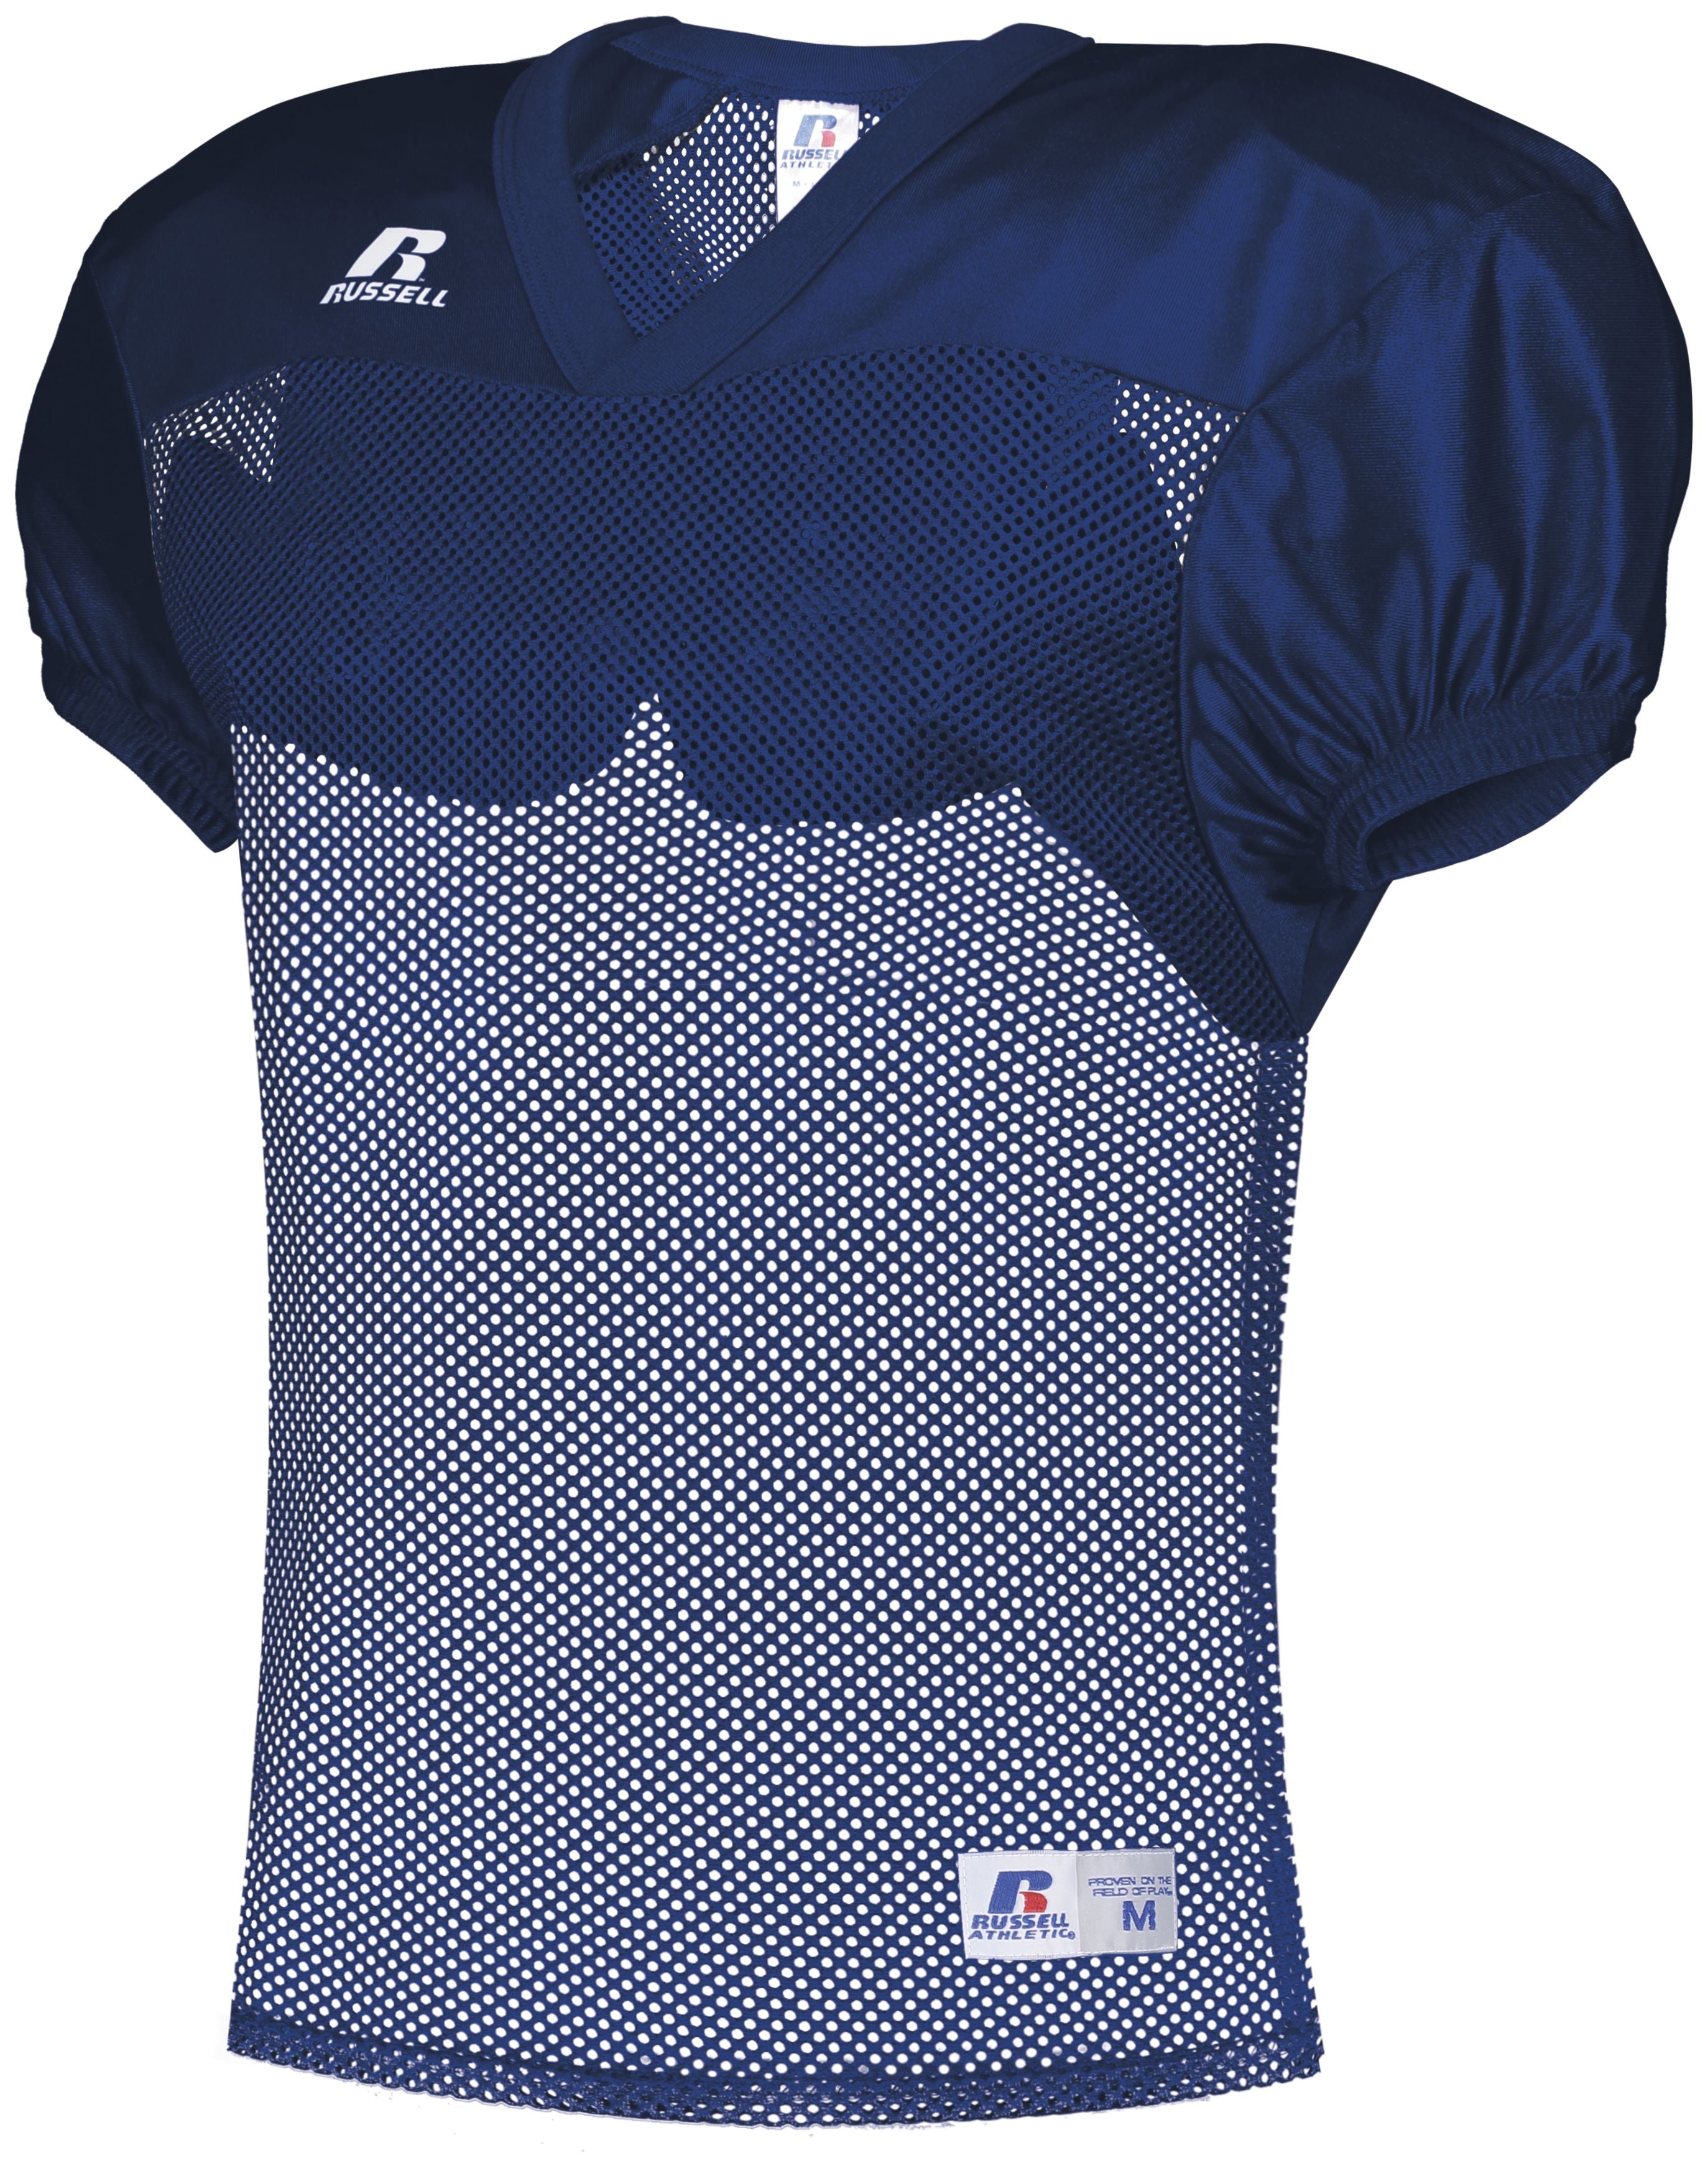 Russell Athletic Youth Stock Practice Jersey in Navy  -Part of the Youth, Youth-Jersey, Football, Russell-Athletic-Products, Shirts, All-Sports, All-Sports-1 product lines at KanaleyCreations.com